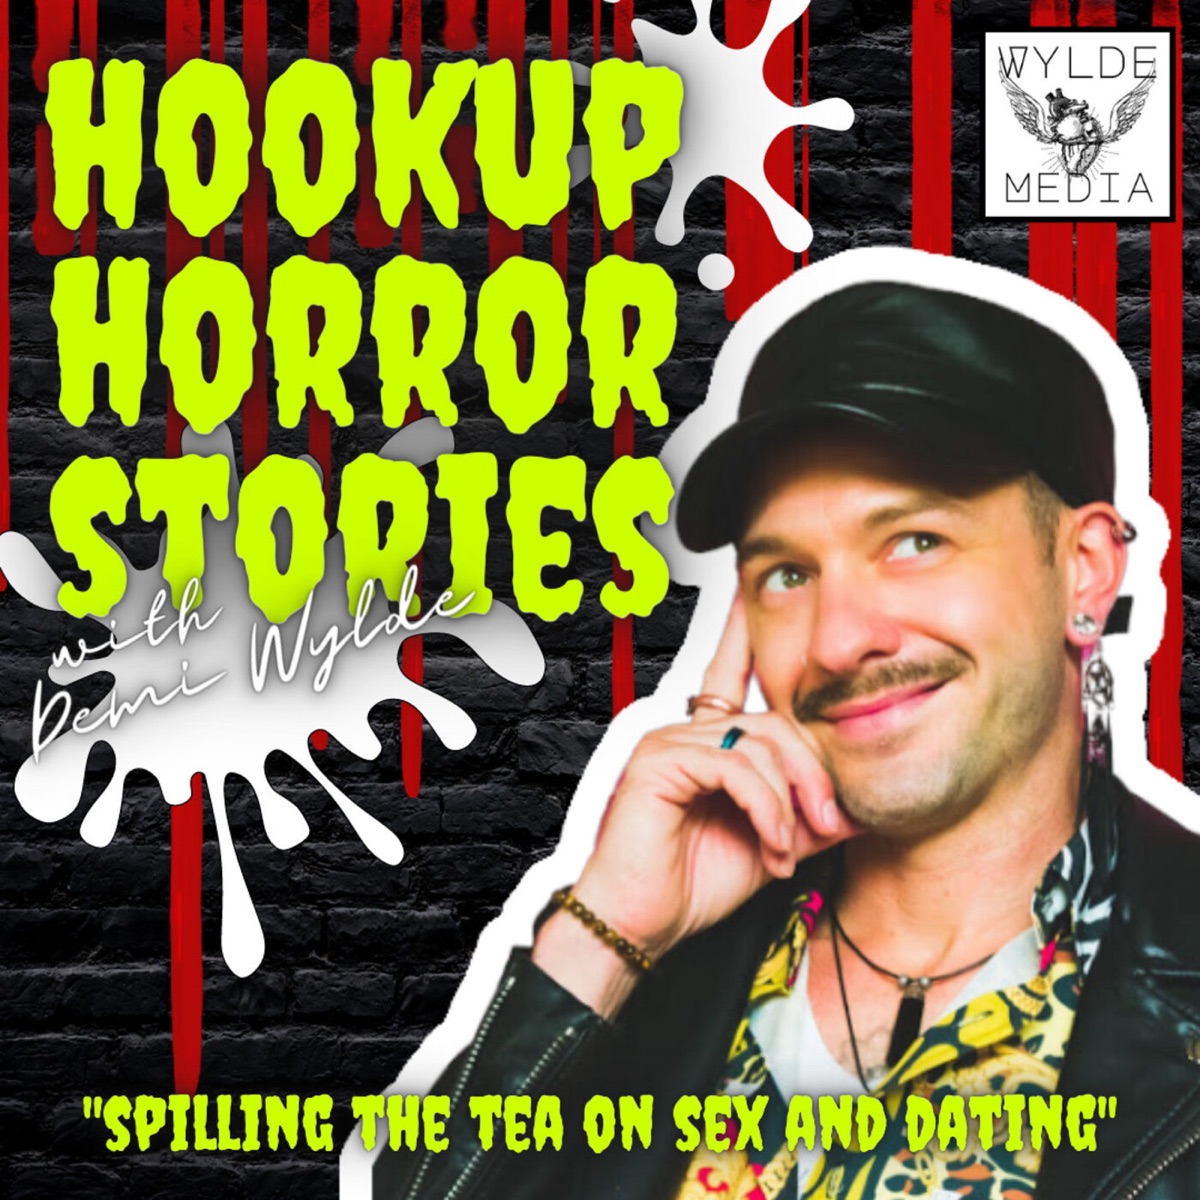 Victoria Matos Fuck - Hookup Horror Stories with Demi Wylde â€“ Podcast â€“ Podtail